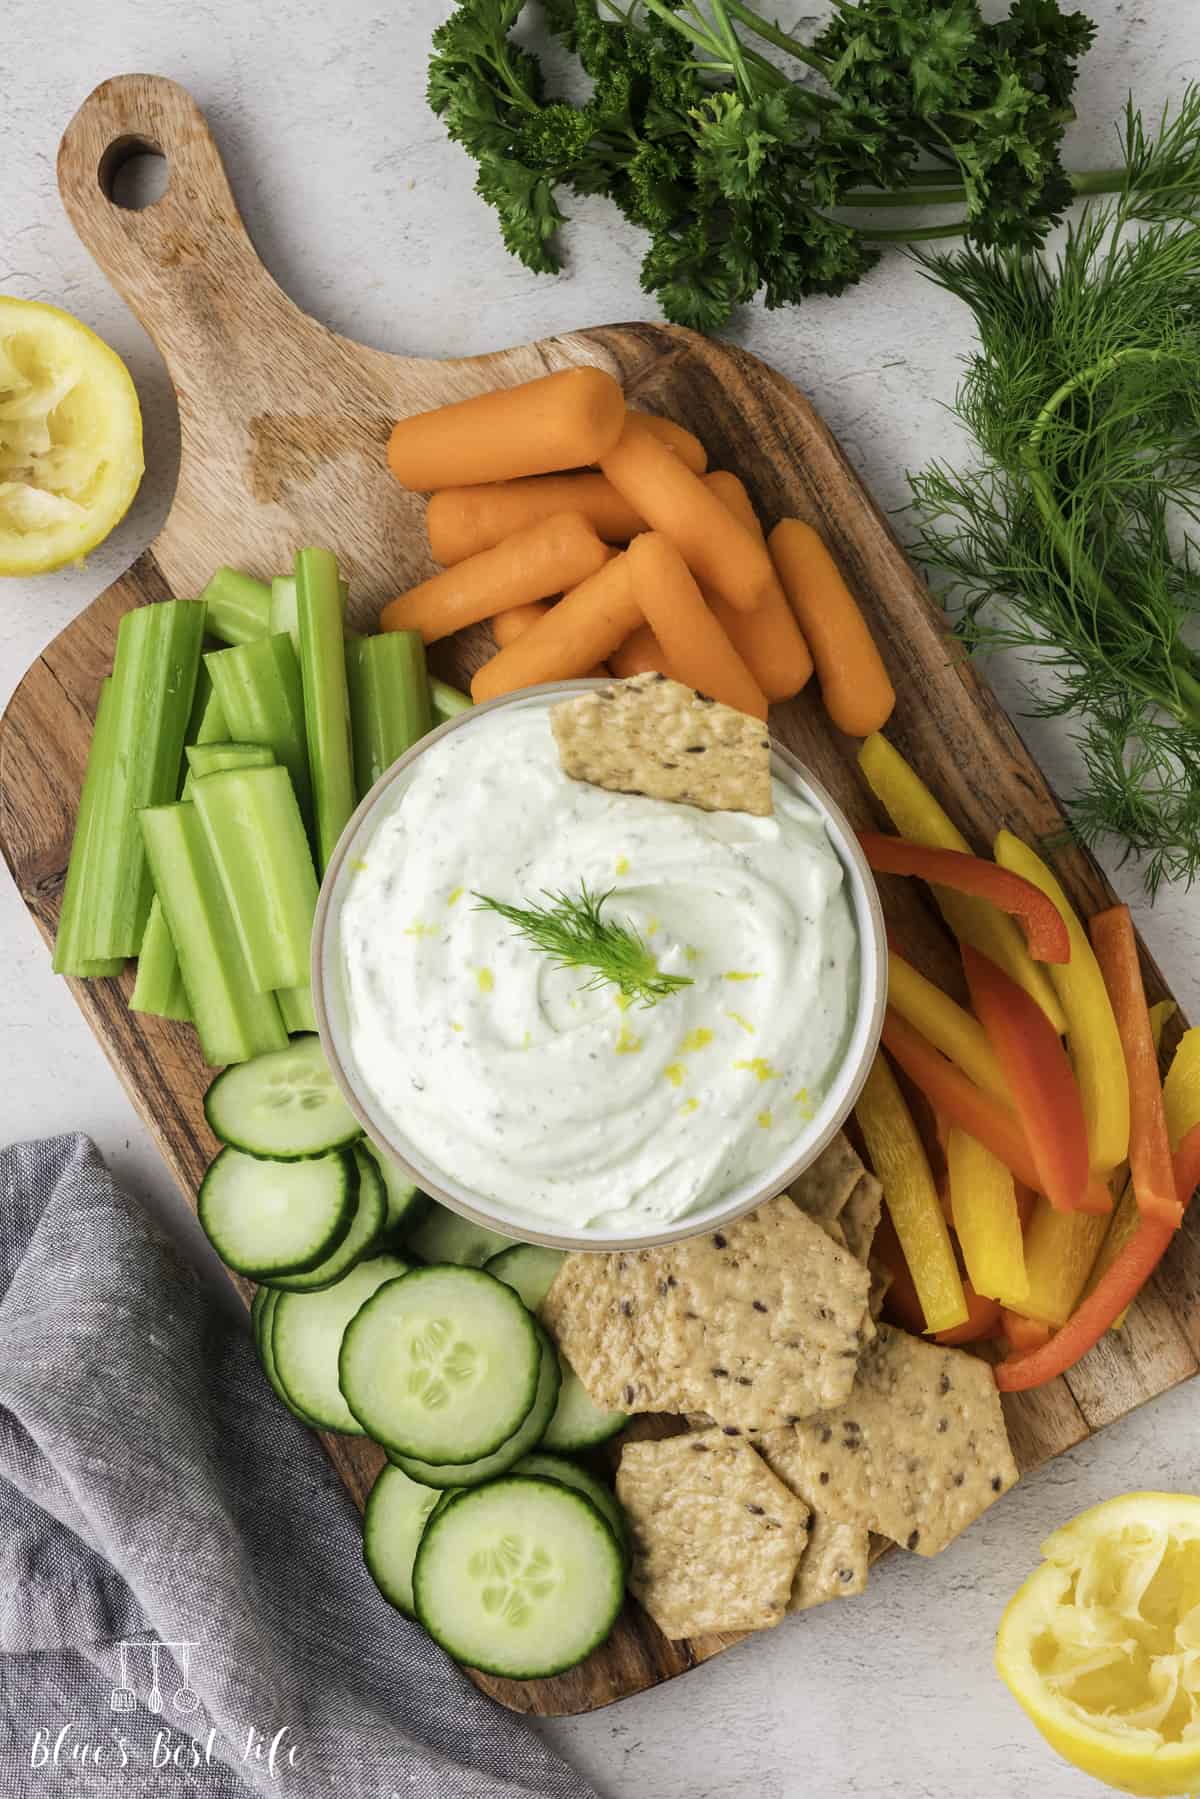 Cottage cheese dip with veggies and crackers. 